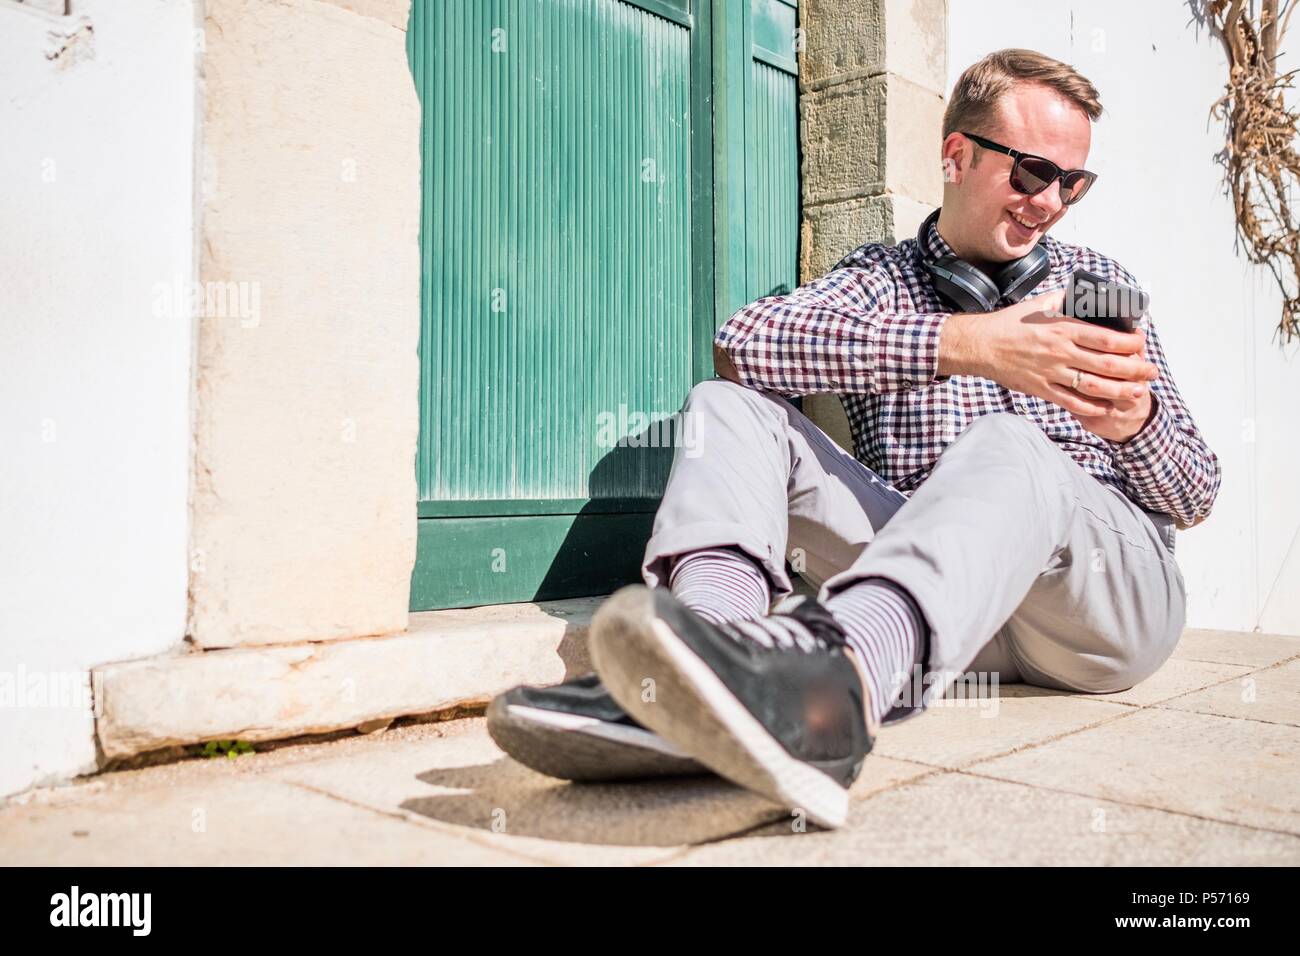 Lifestyle photo of young guy with sunglasses, headphone and smartphone in urban setting Stock Photo